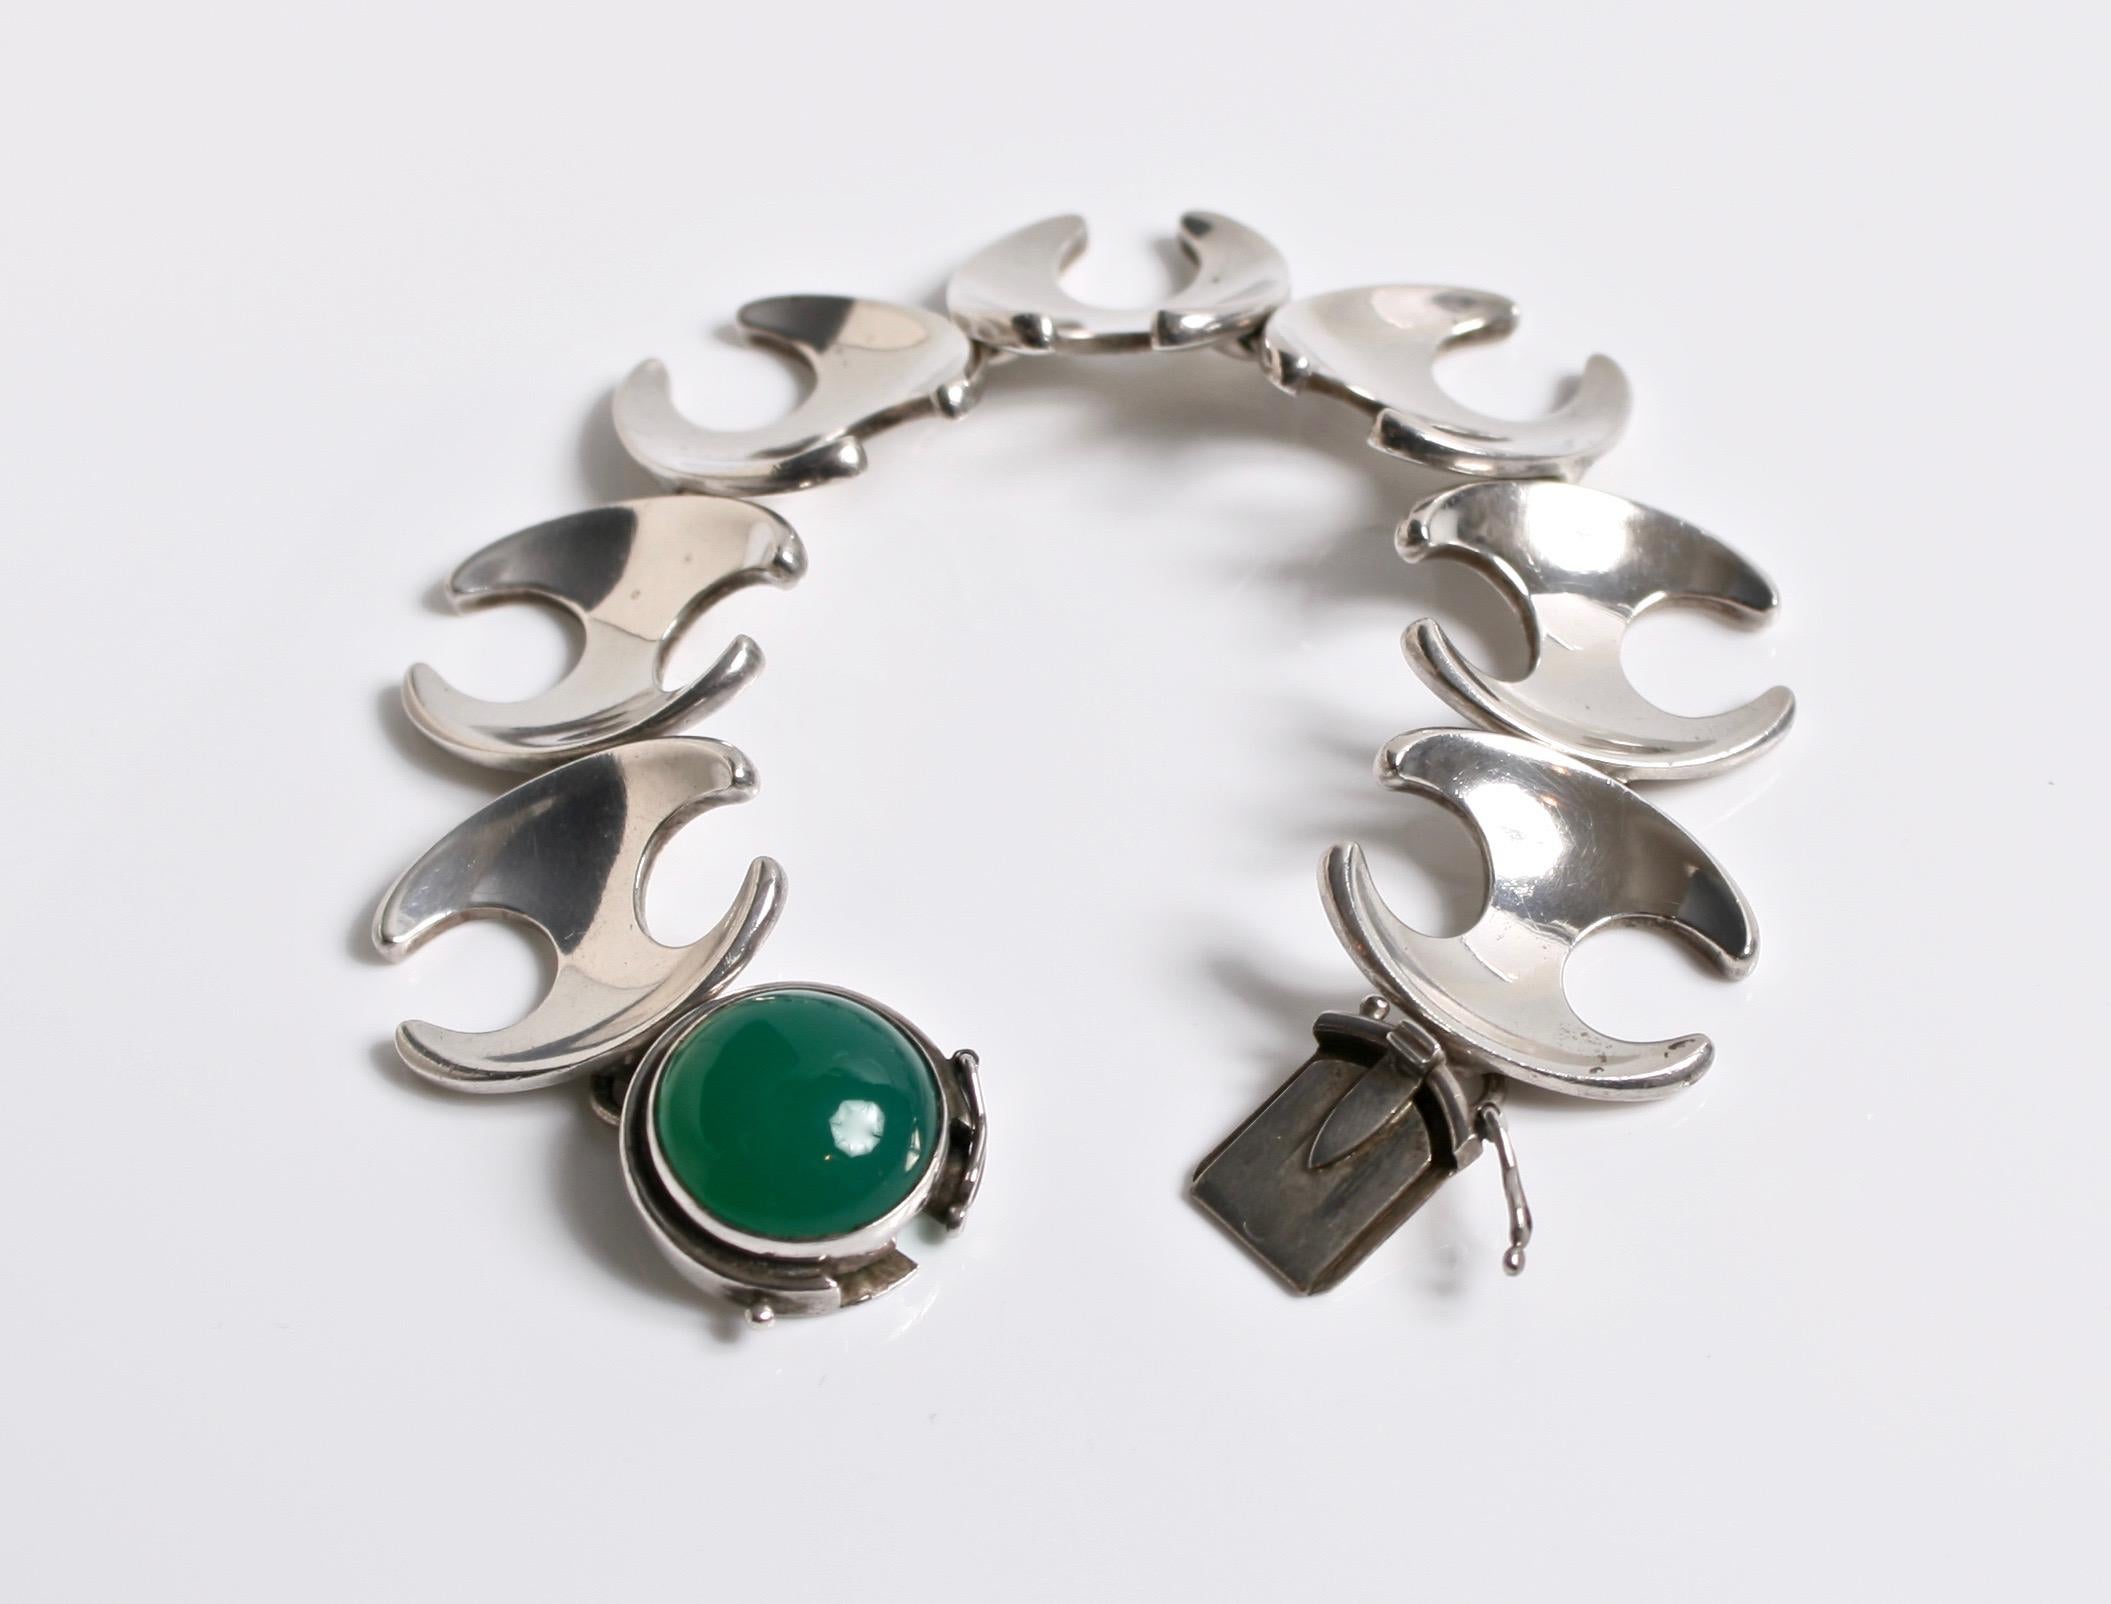 Georg Jensen sterling silver & Green agate cabochon bracelet designed by Henning Koppel Denmark c.1950 
Design number 130 comes in a Georg Jensen box
Tight clasp very rare unusual design
Length 19cm